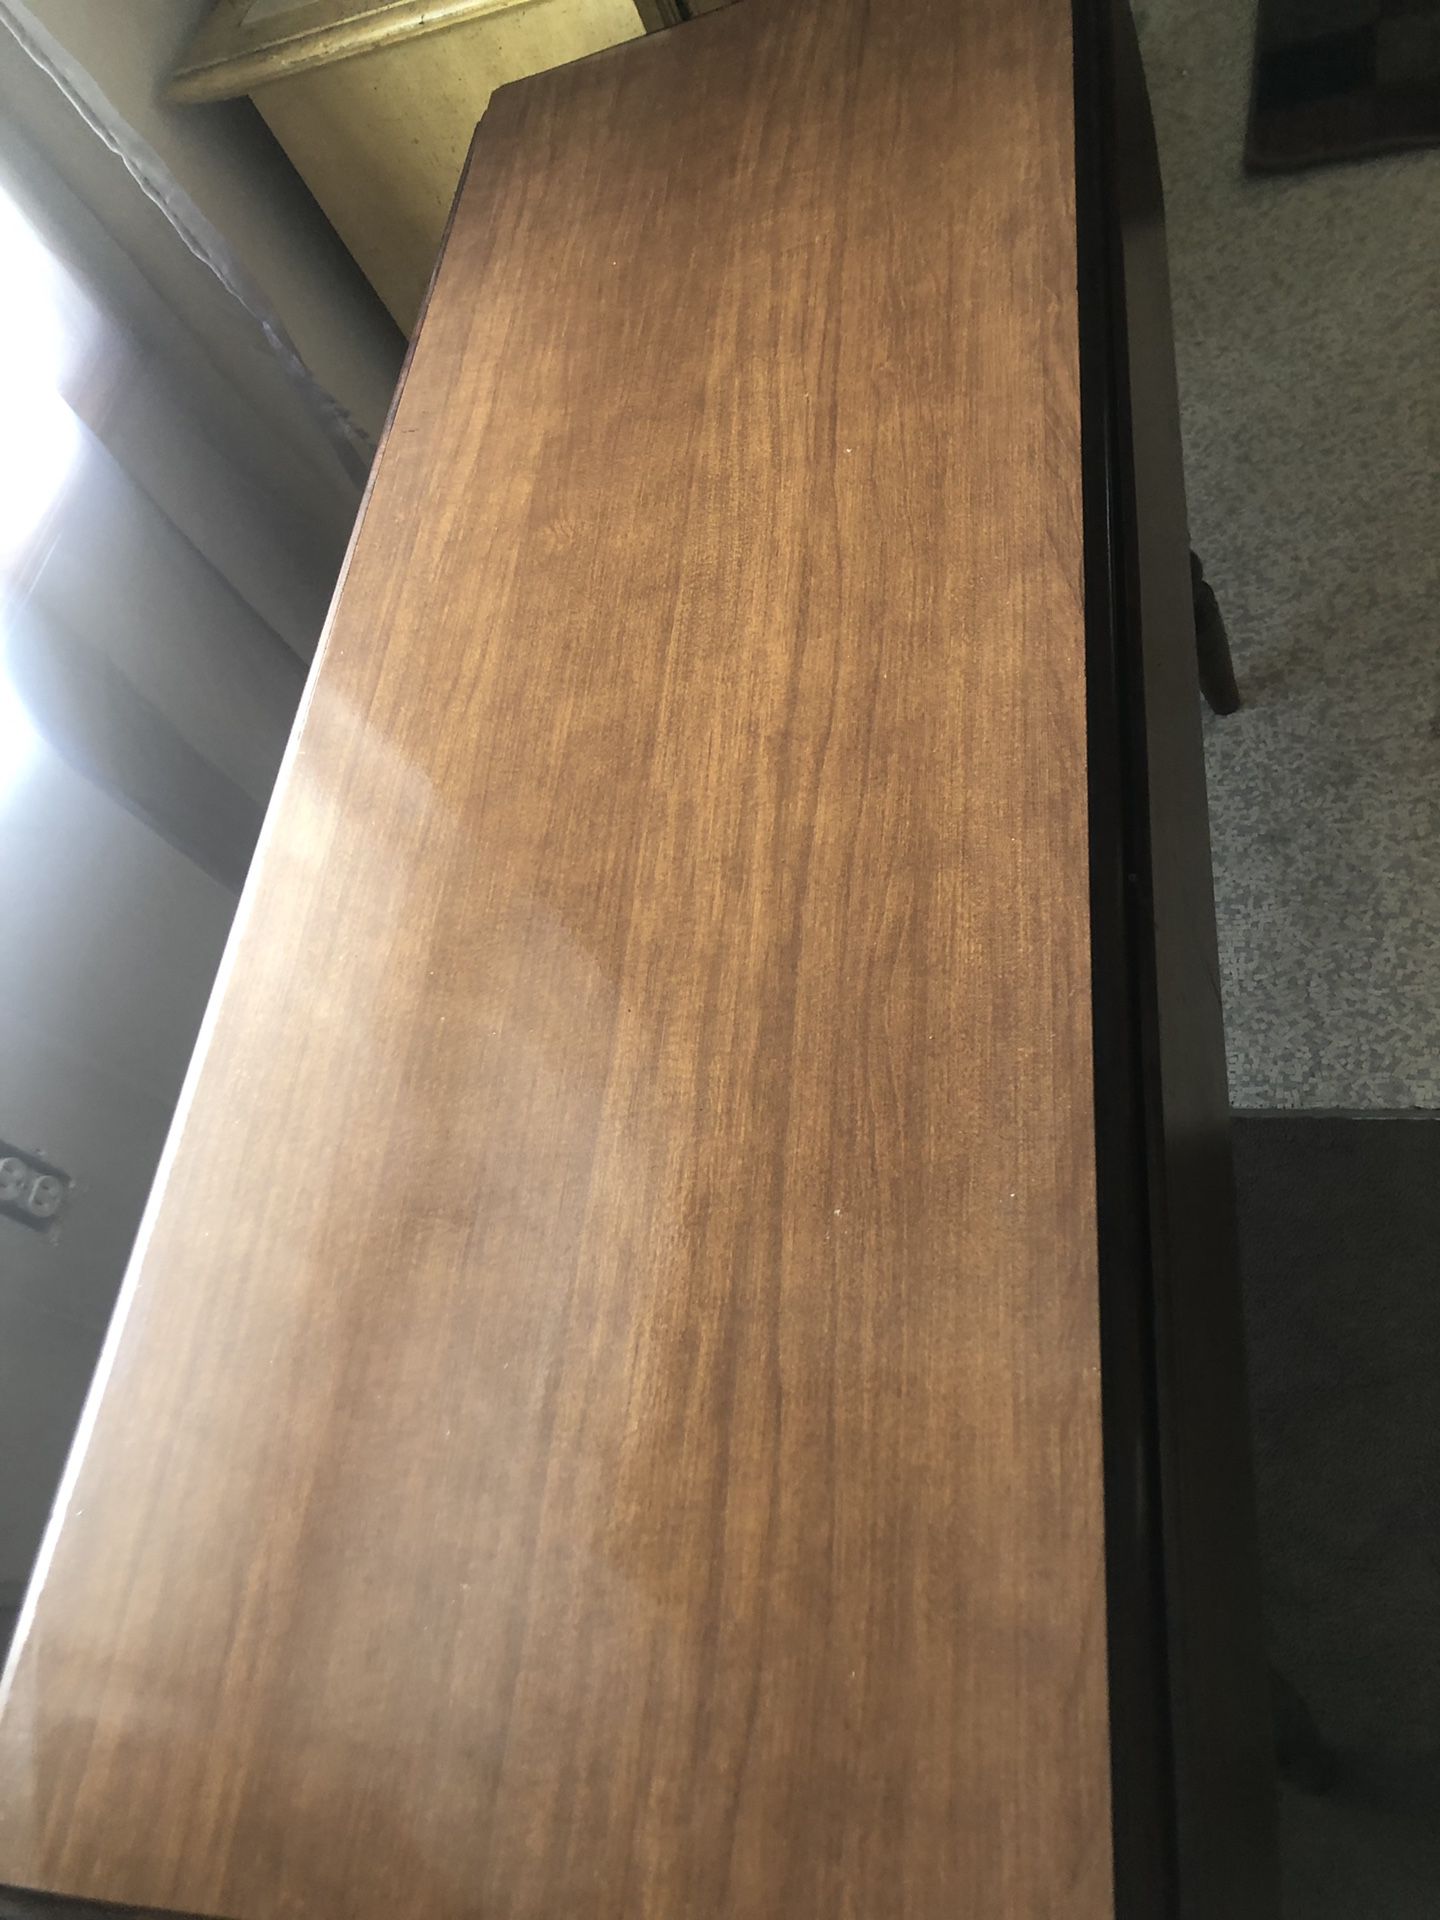 Solid wood kitchen table opening sides $25